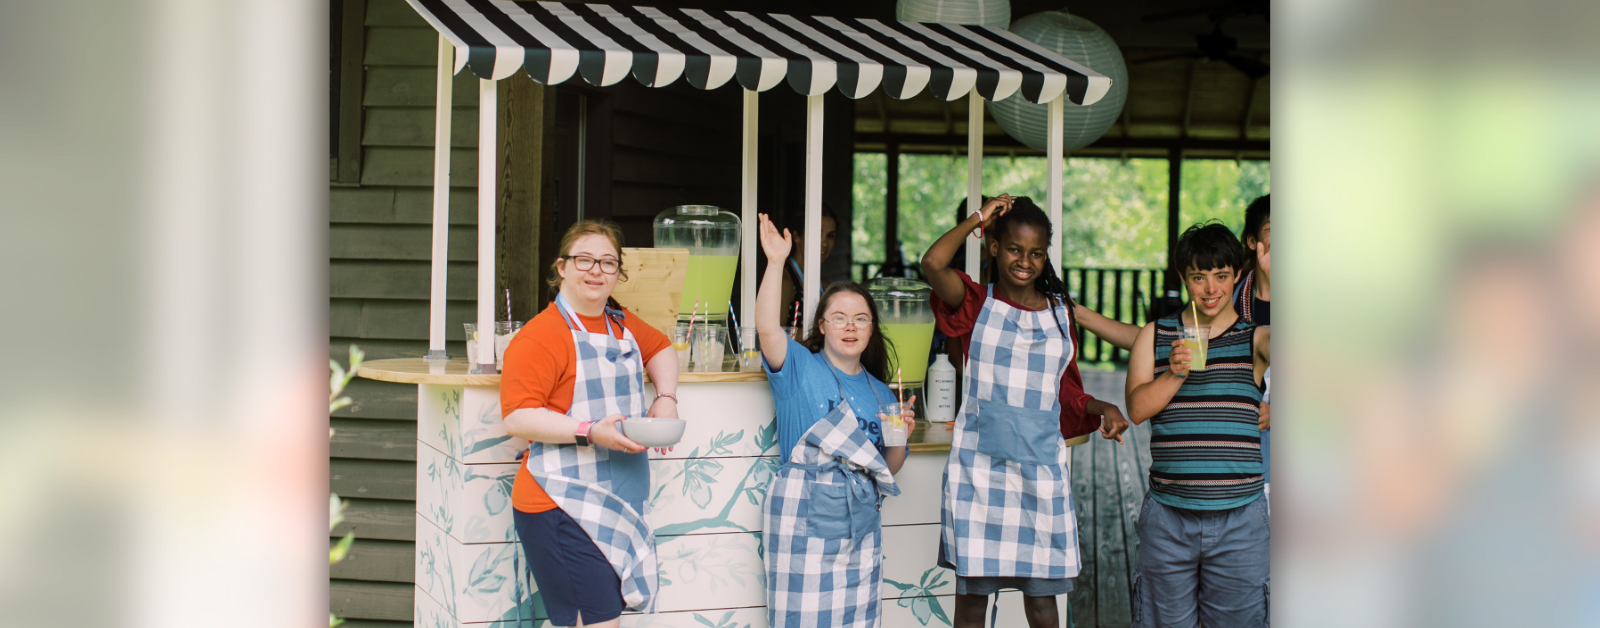 photo of Penny and other teens with disabilities standing in front of a lemonade stand and waving